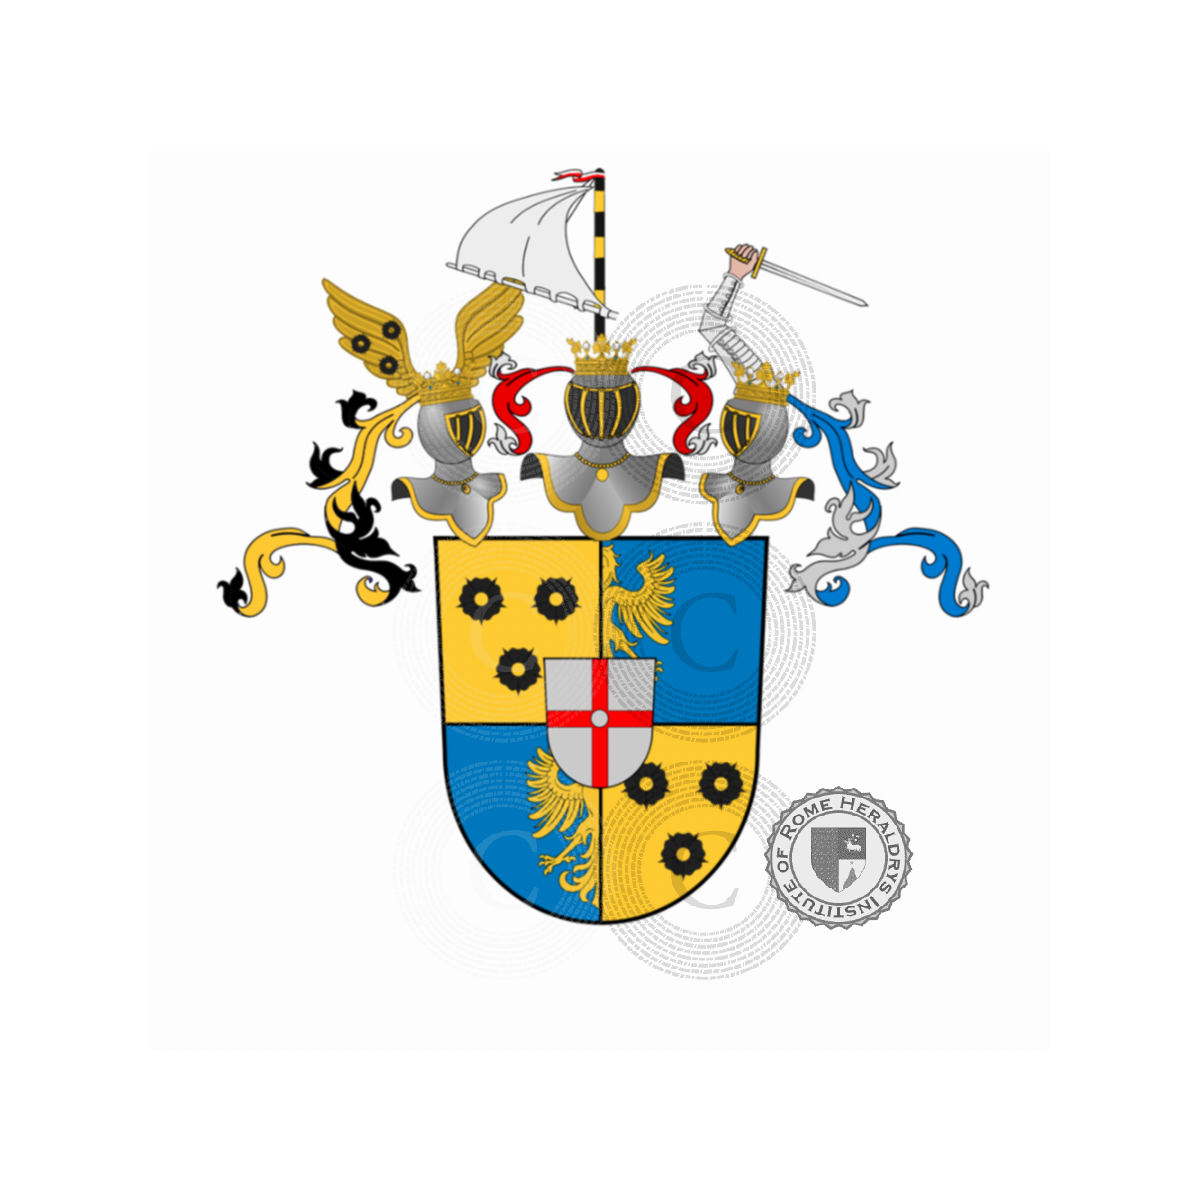 Coat of arms of familySeeger